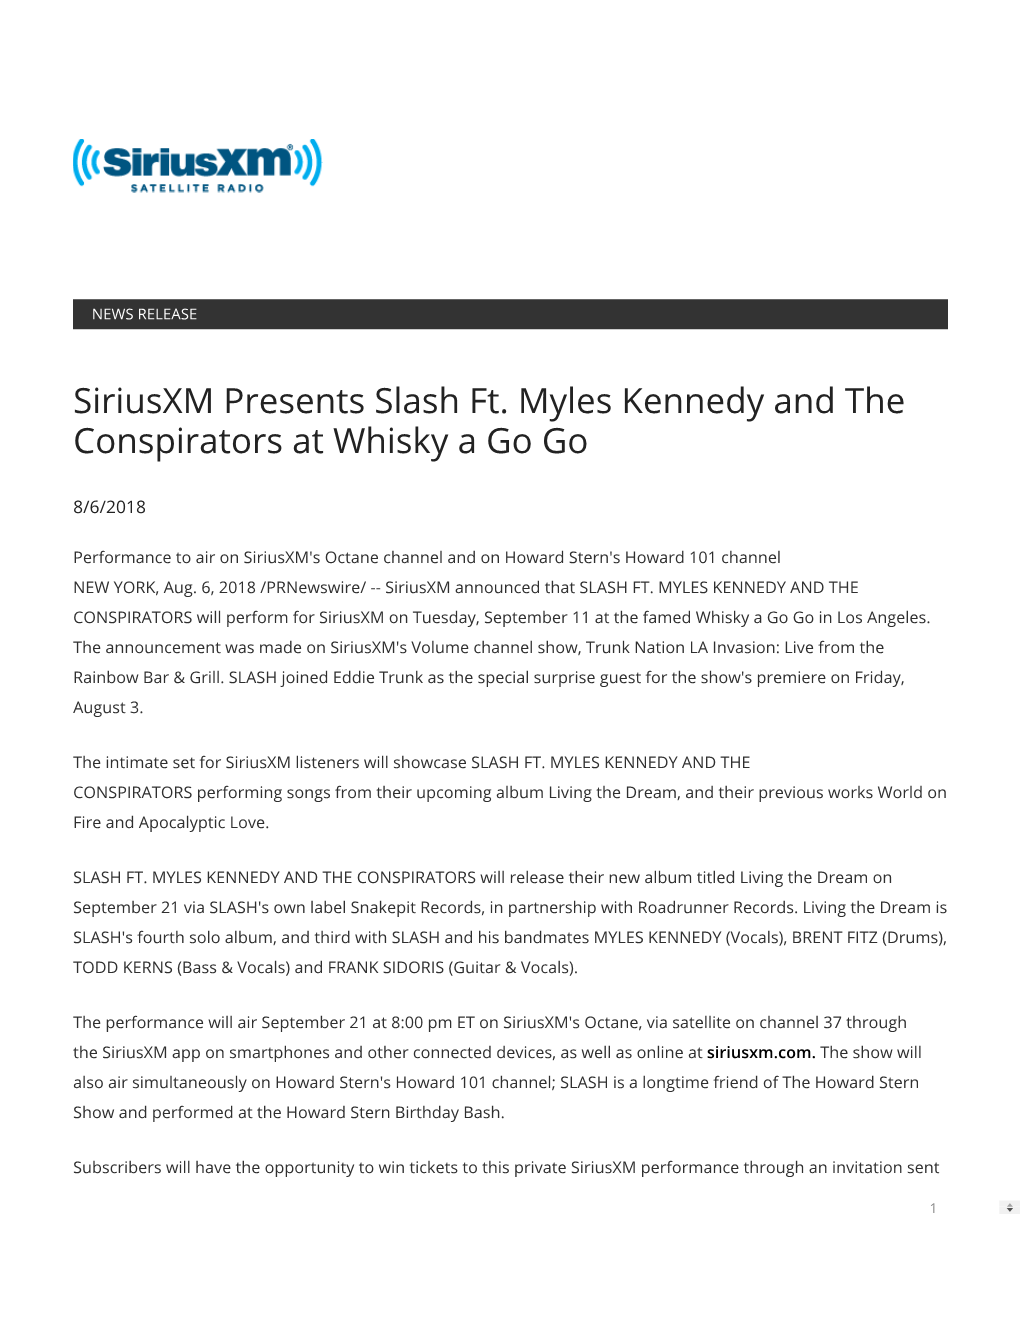 Siriusxm Presents Slash Ft. Myles Kennedy and the Conspirators at Whisky a Go Go